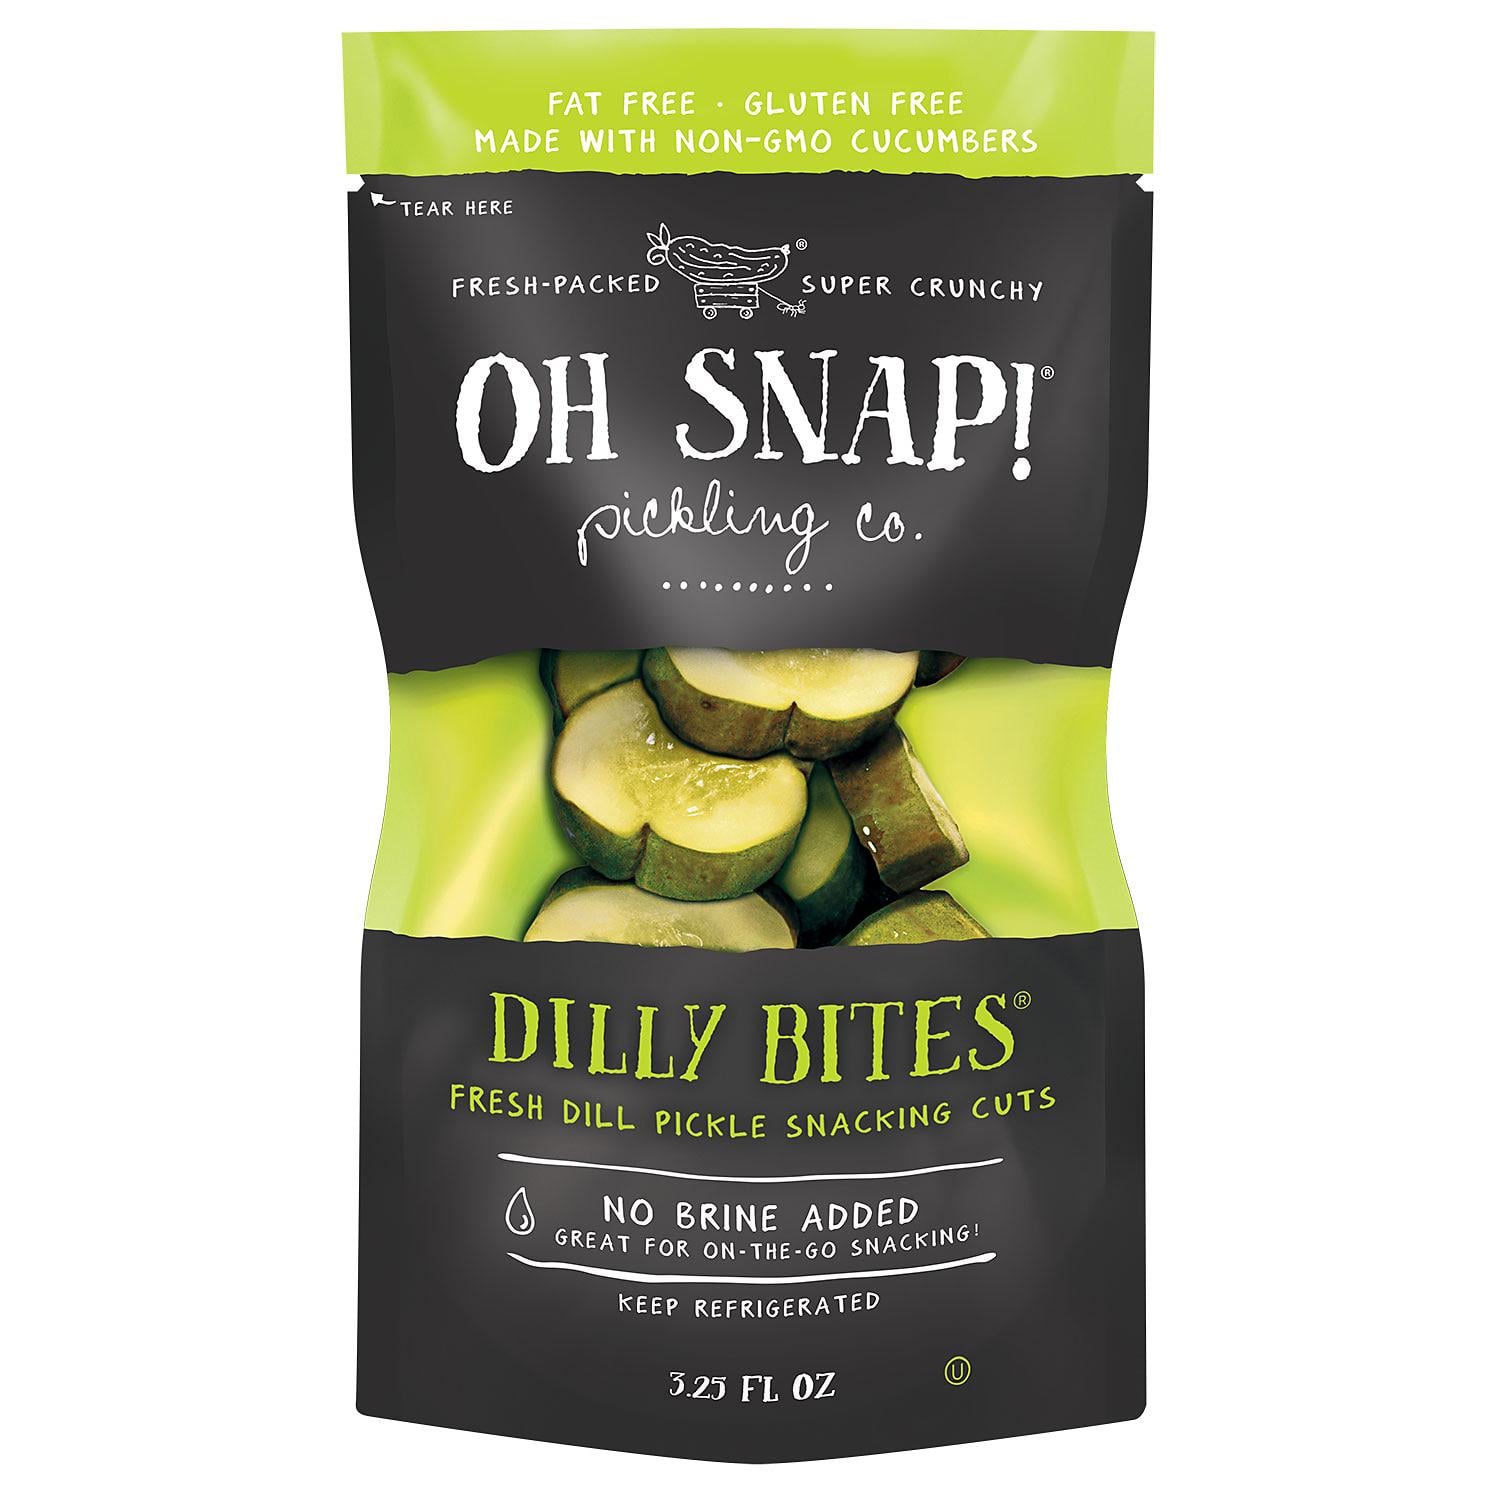 Oh Snap Pickle Pouches in Bulk at Sam's Club